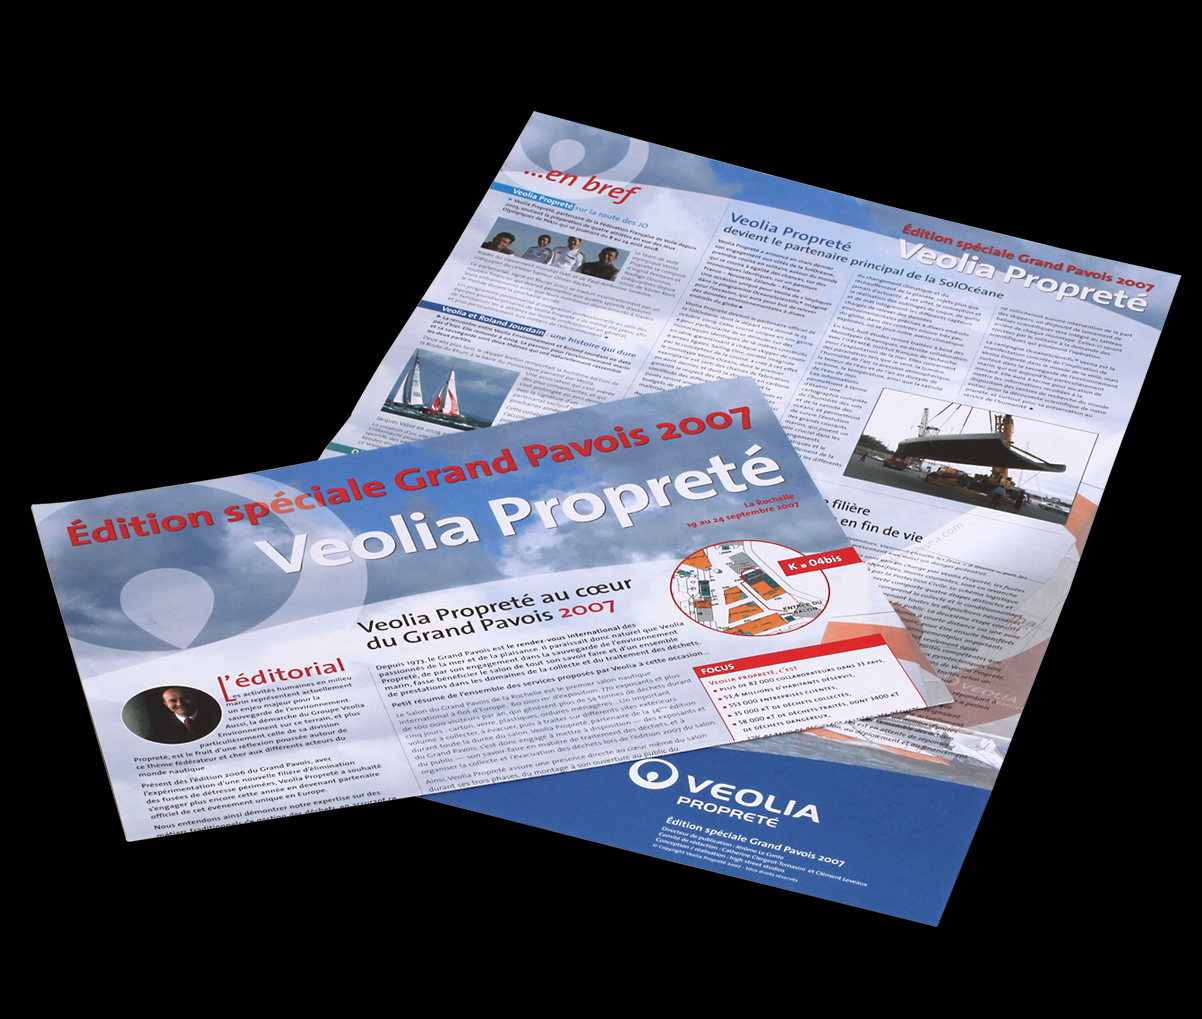 Veolia Propreté - Newsletter - cover and back